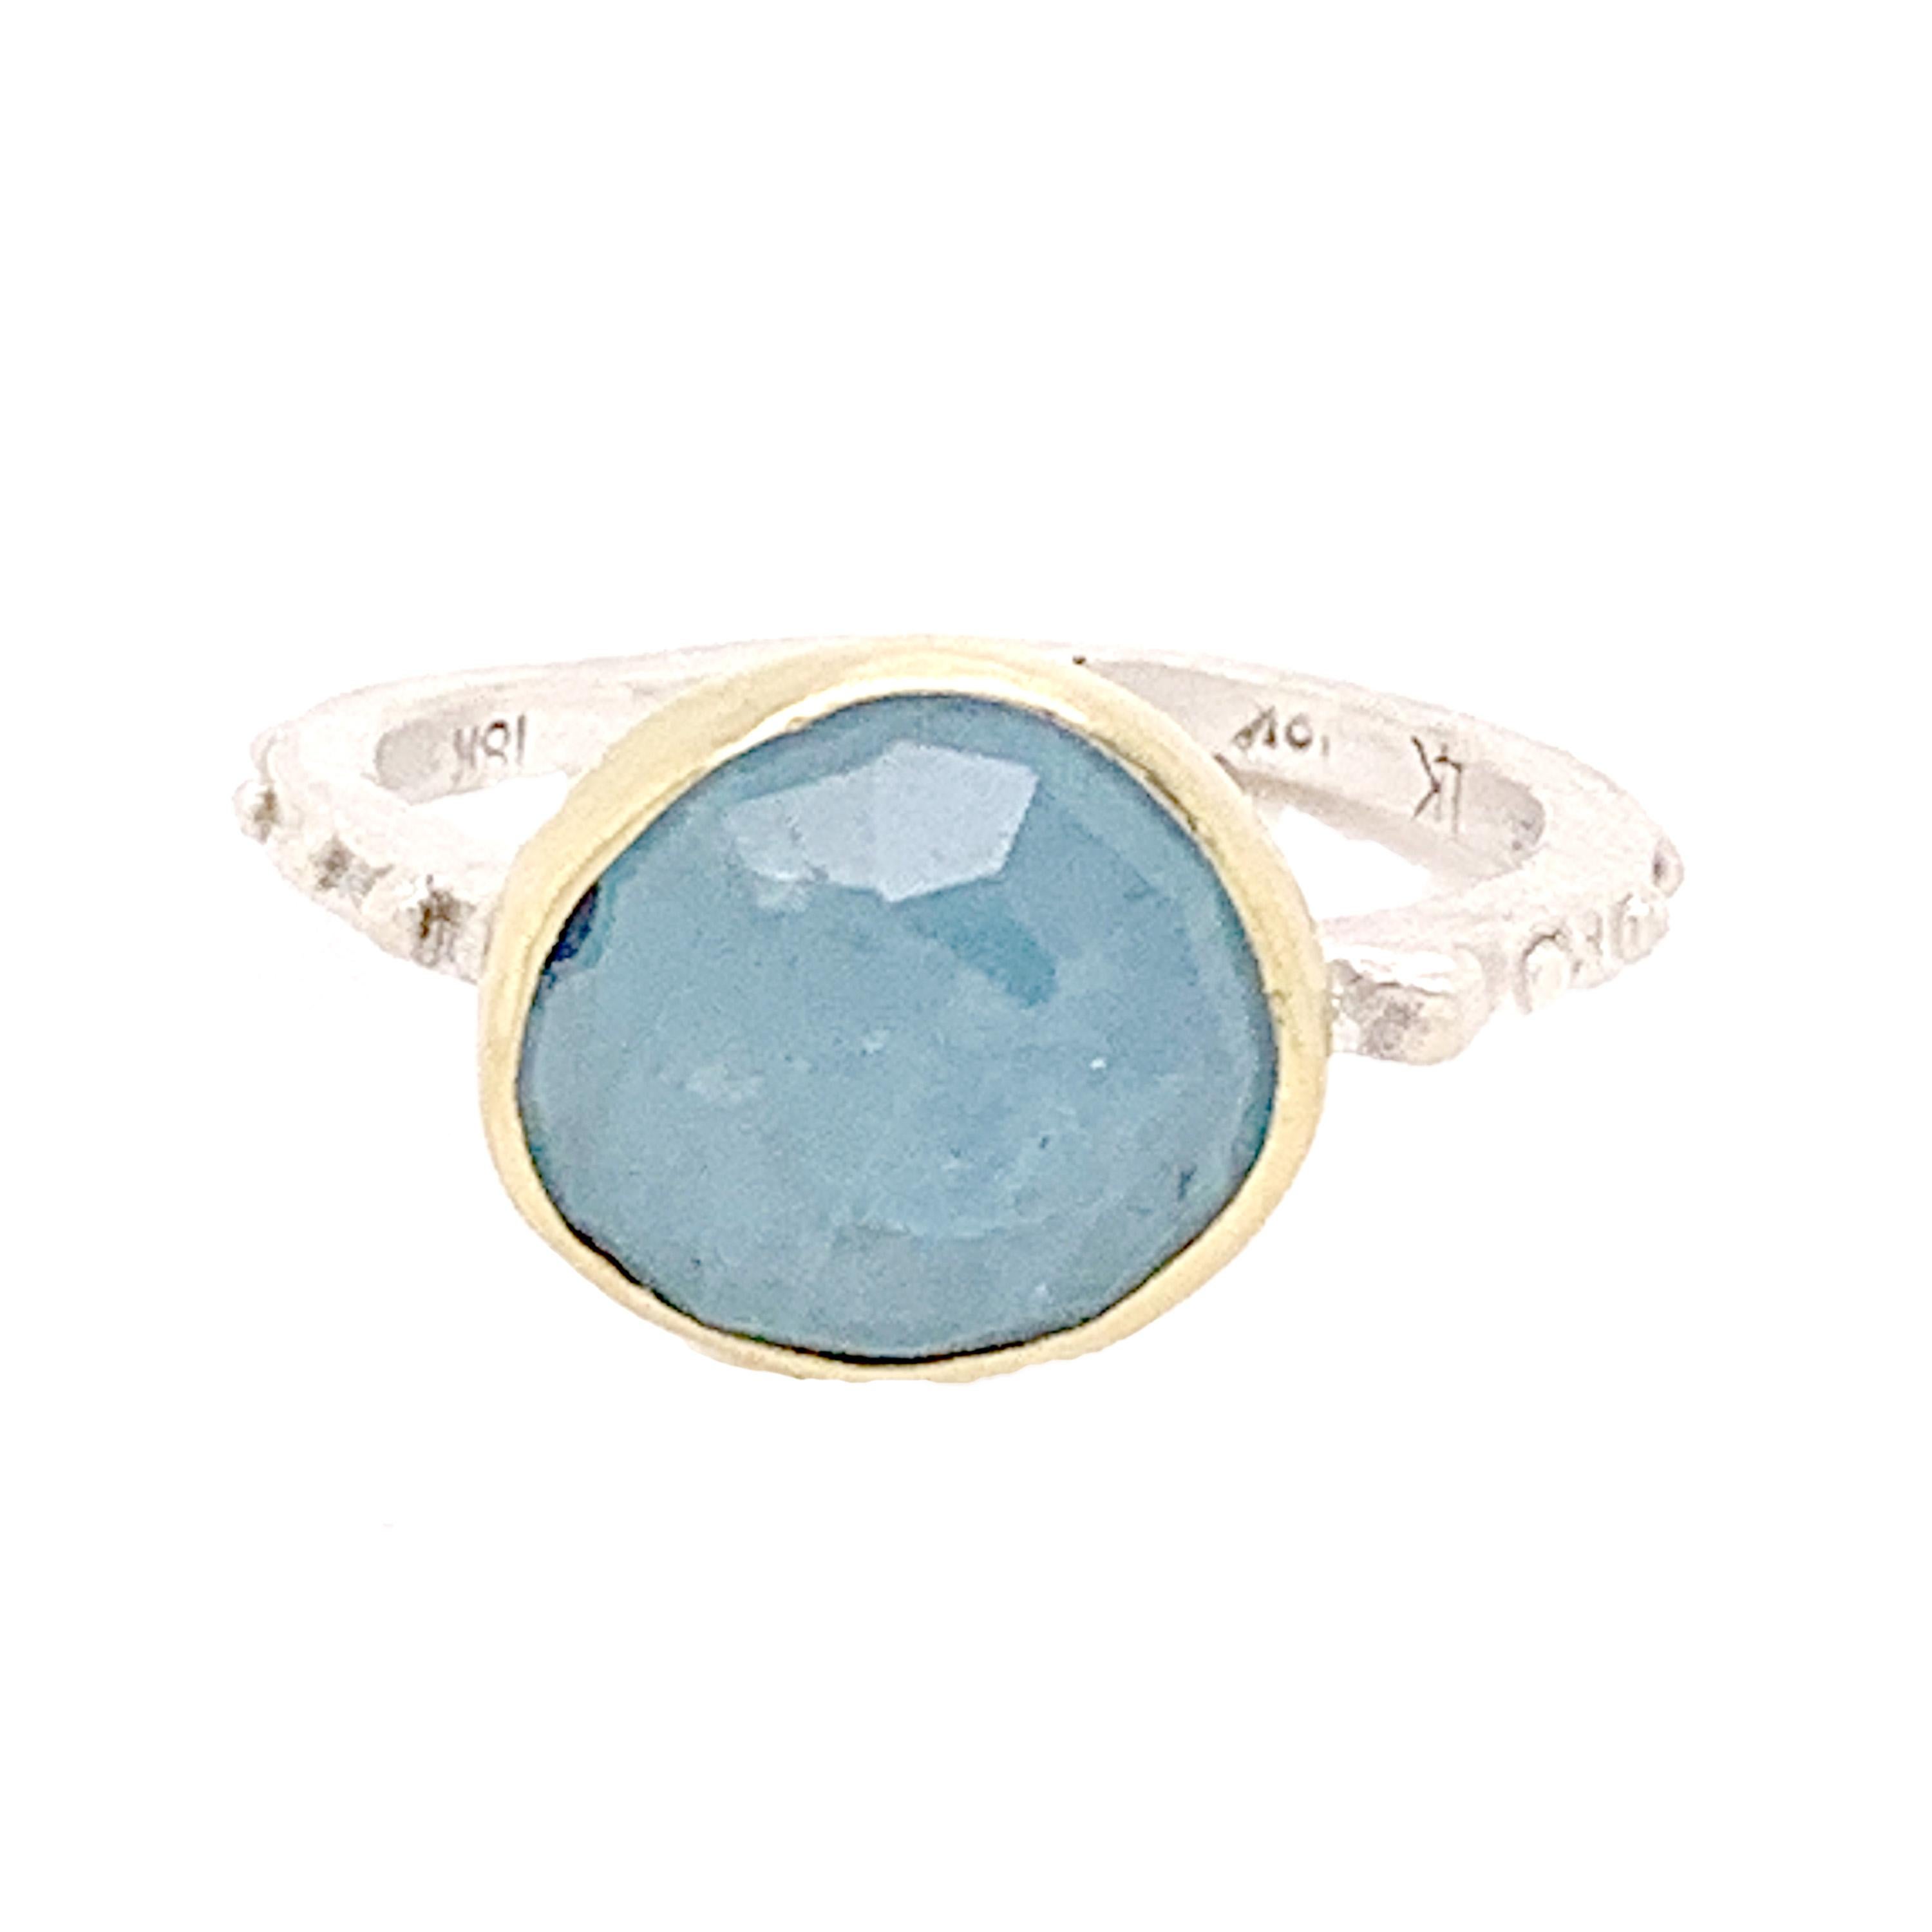 Simple rose-cut aquamarine, nestled into an 18k Gold bezel setting with a sterling back and sterling stackable band.  This piece is hand made and one of a kind.
Size - 6.5